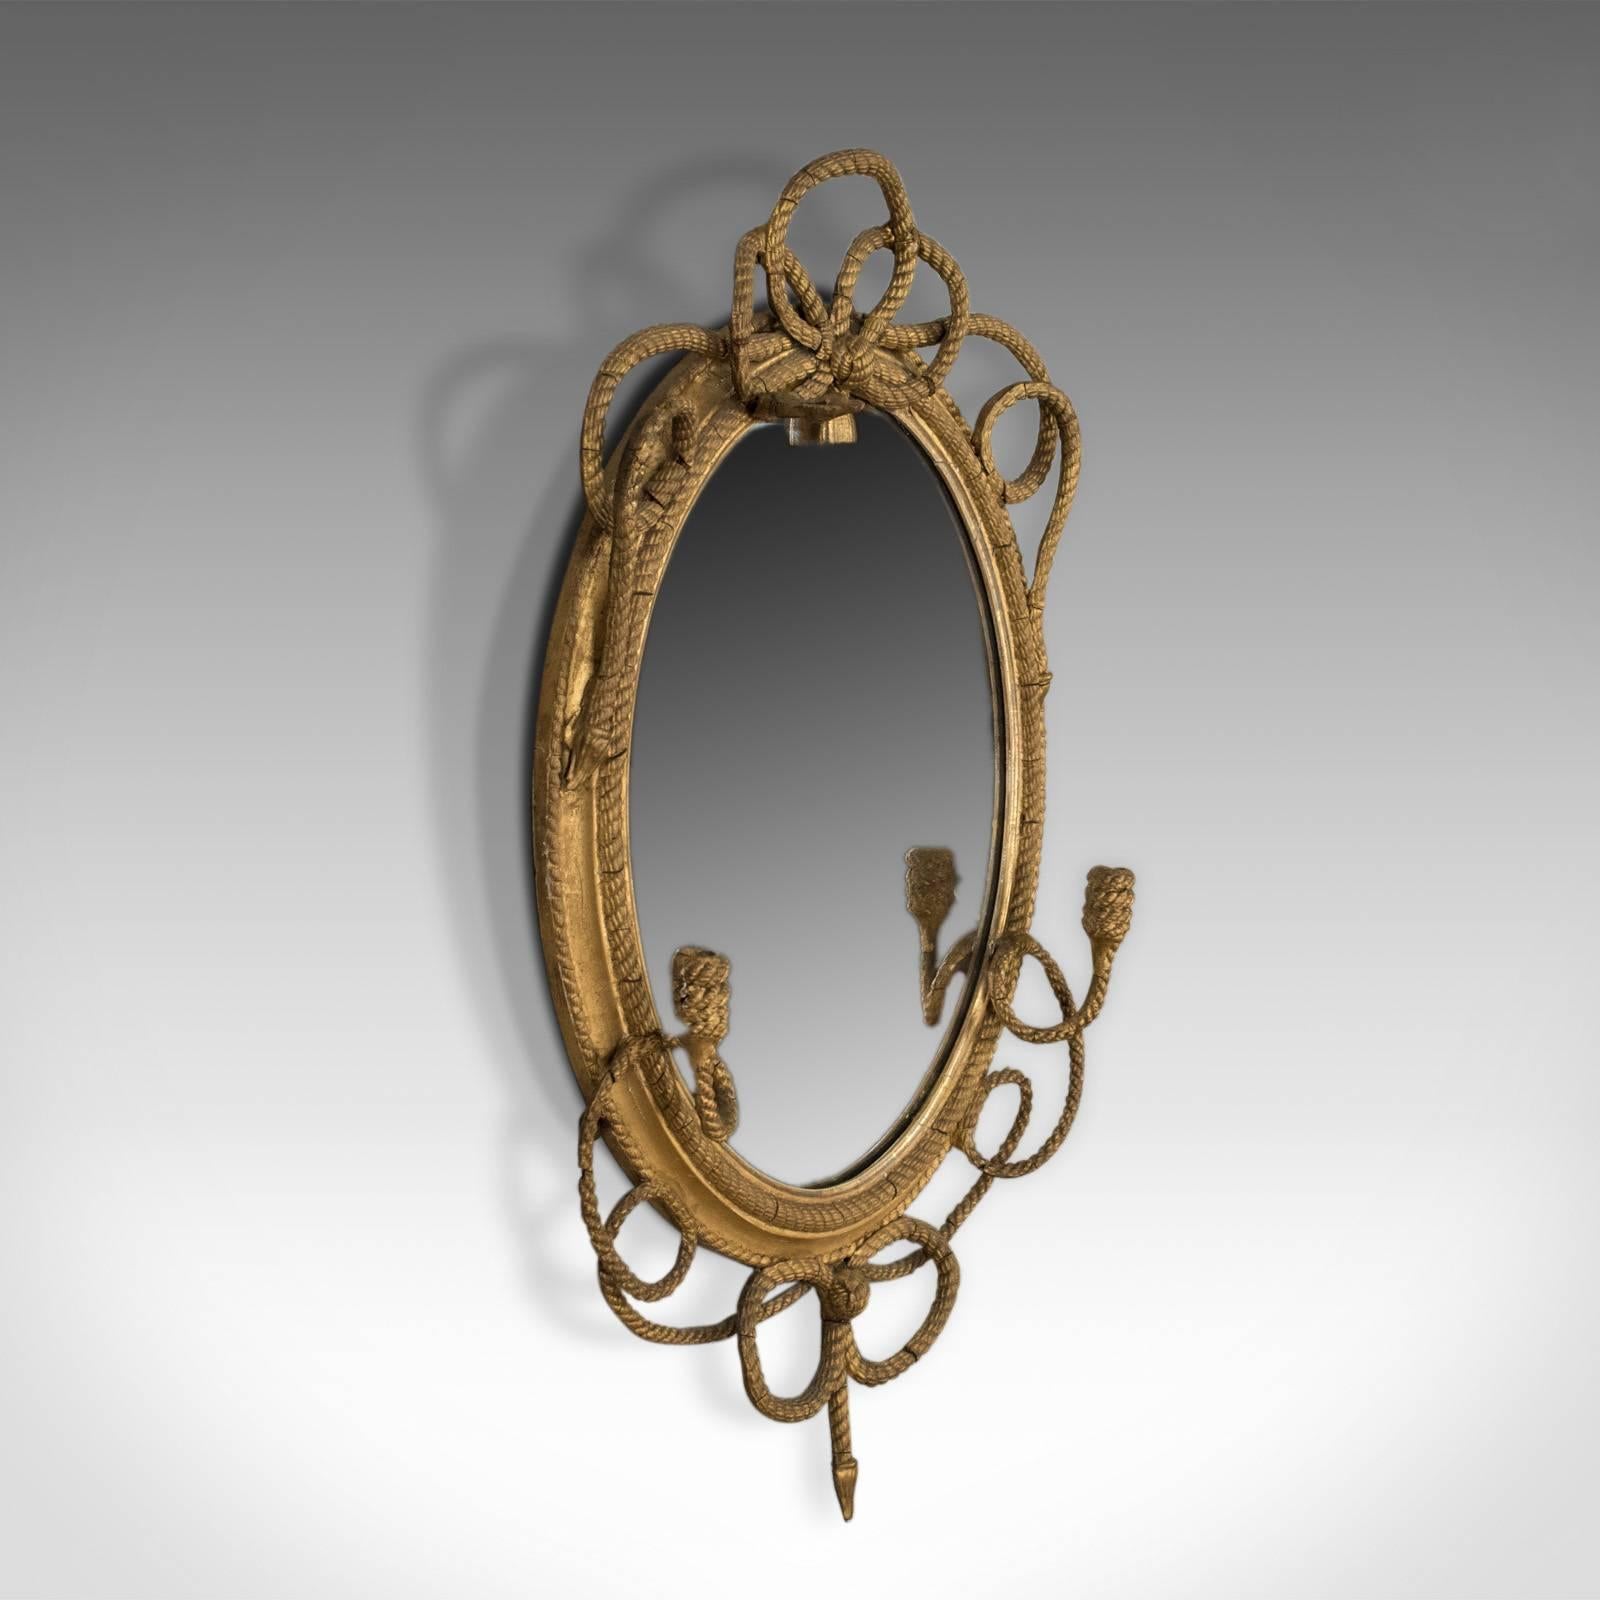 This is an antique girandole wall mirror, an early 19th century, late Georgian, gilt gesso frame with nautical overtones dating to circa 1820.

Attractive mid-sized Georgian wall mirror
Gilt gesso displaying desirable aged patina
Rope twist